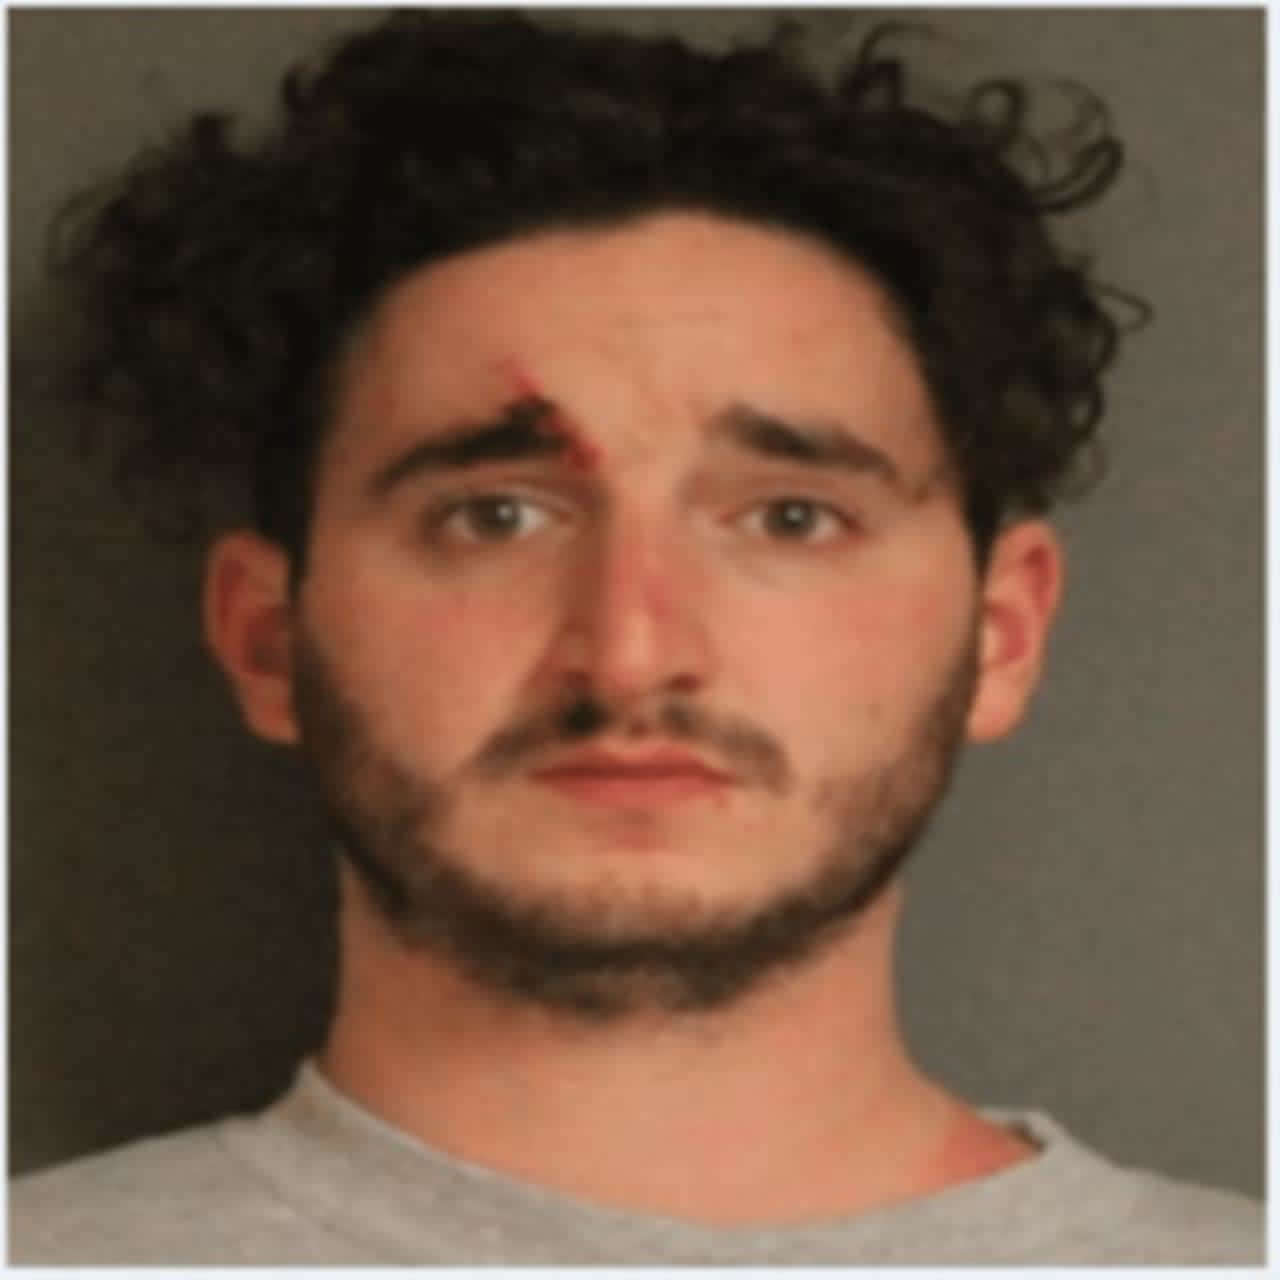 Zachary Tokson pleaded guilty to three felony counts after while he was driving the wrong way on I-684 that resulted in the death of a woman.